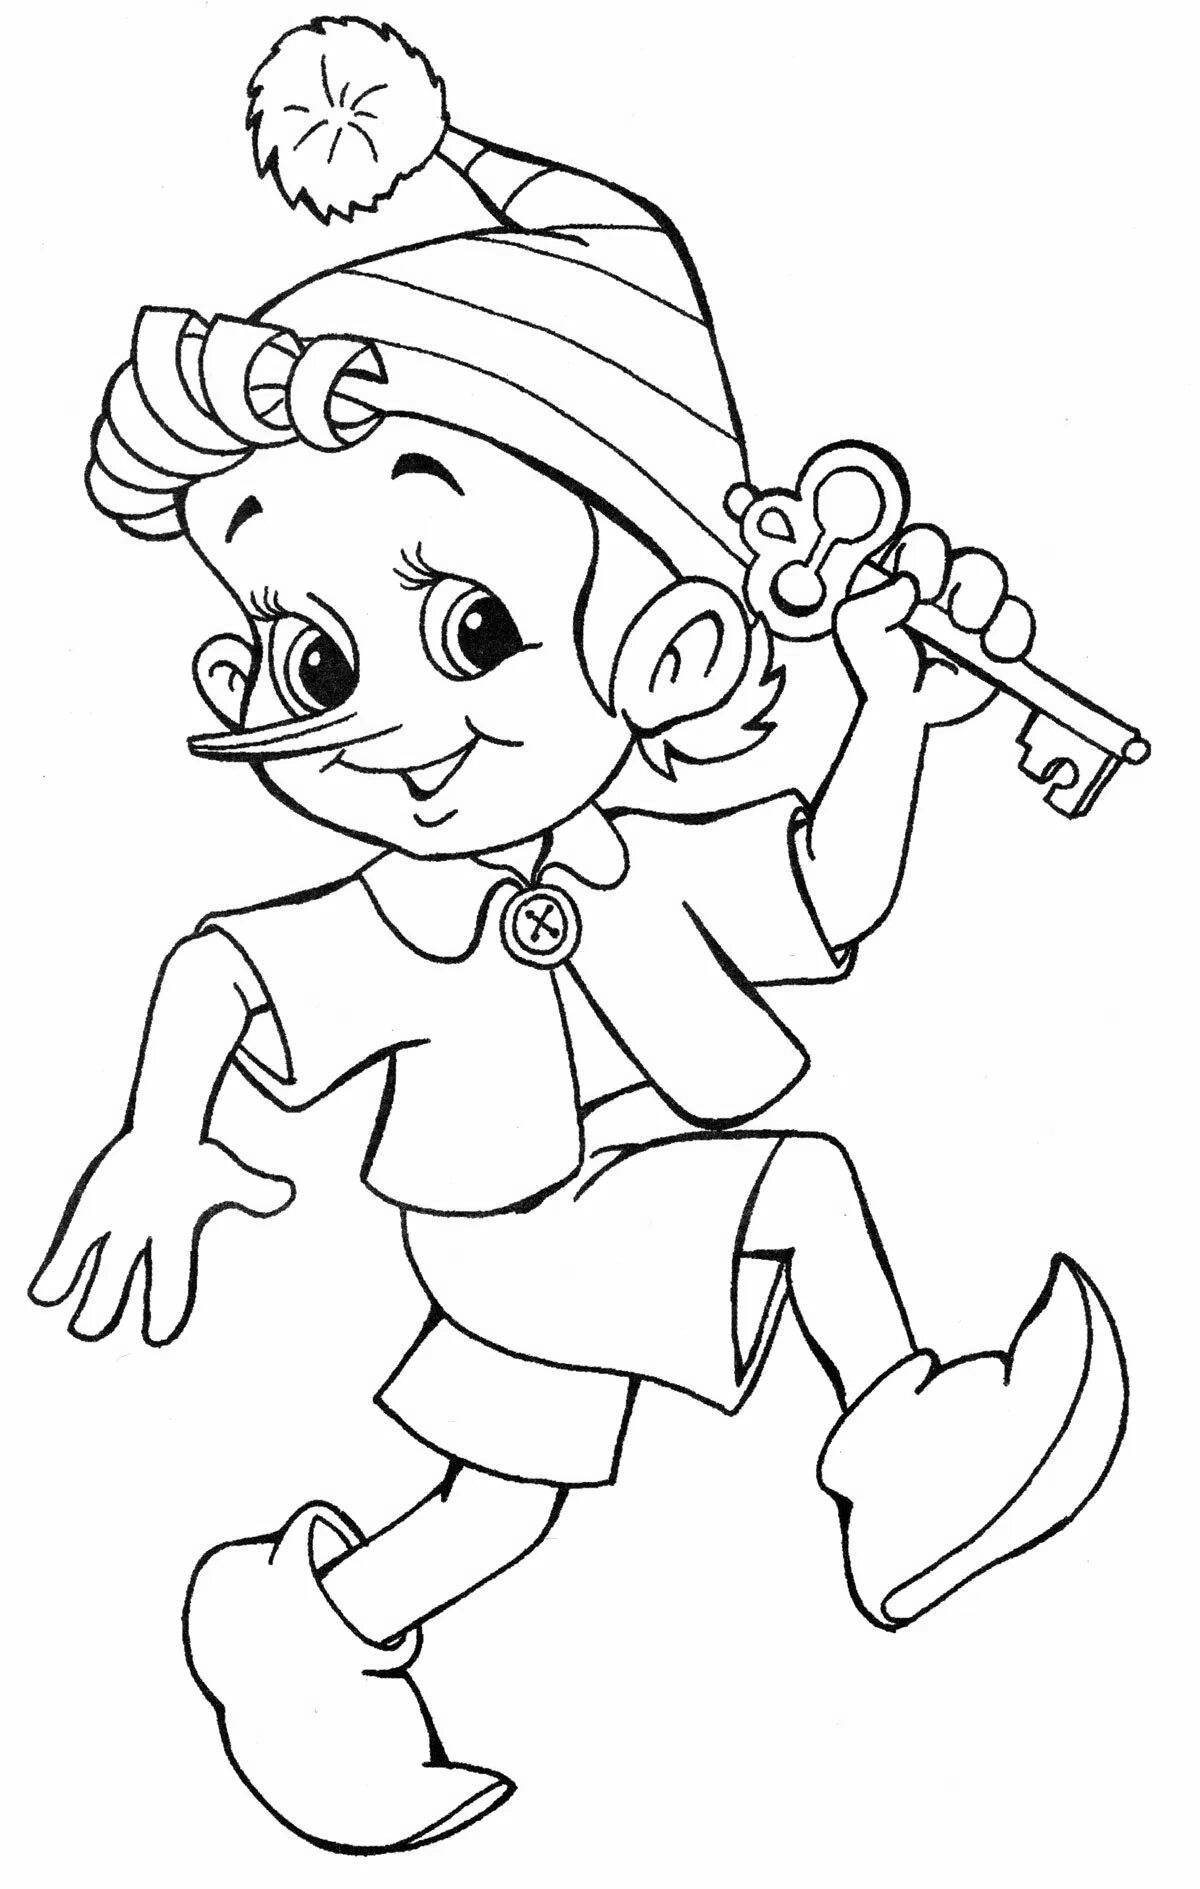 Gorgeous Golden Key coloring page